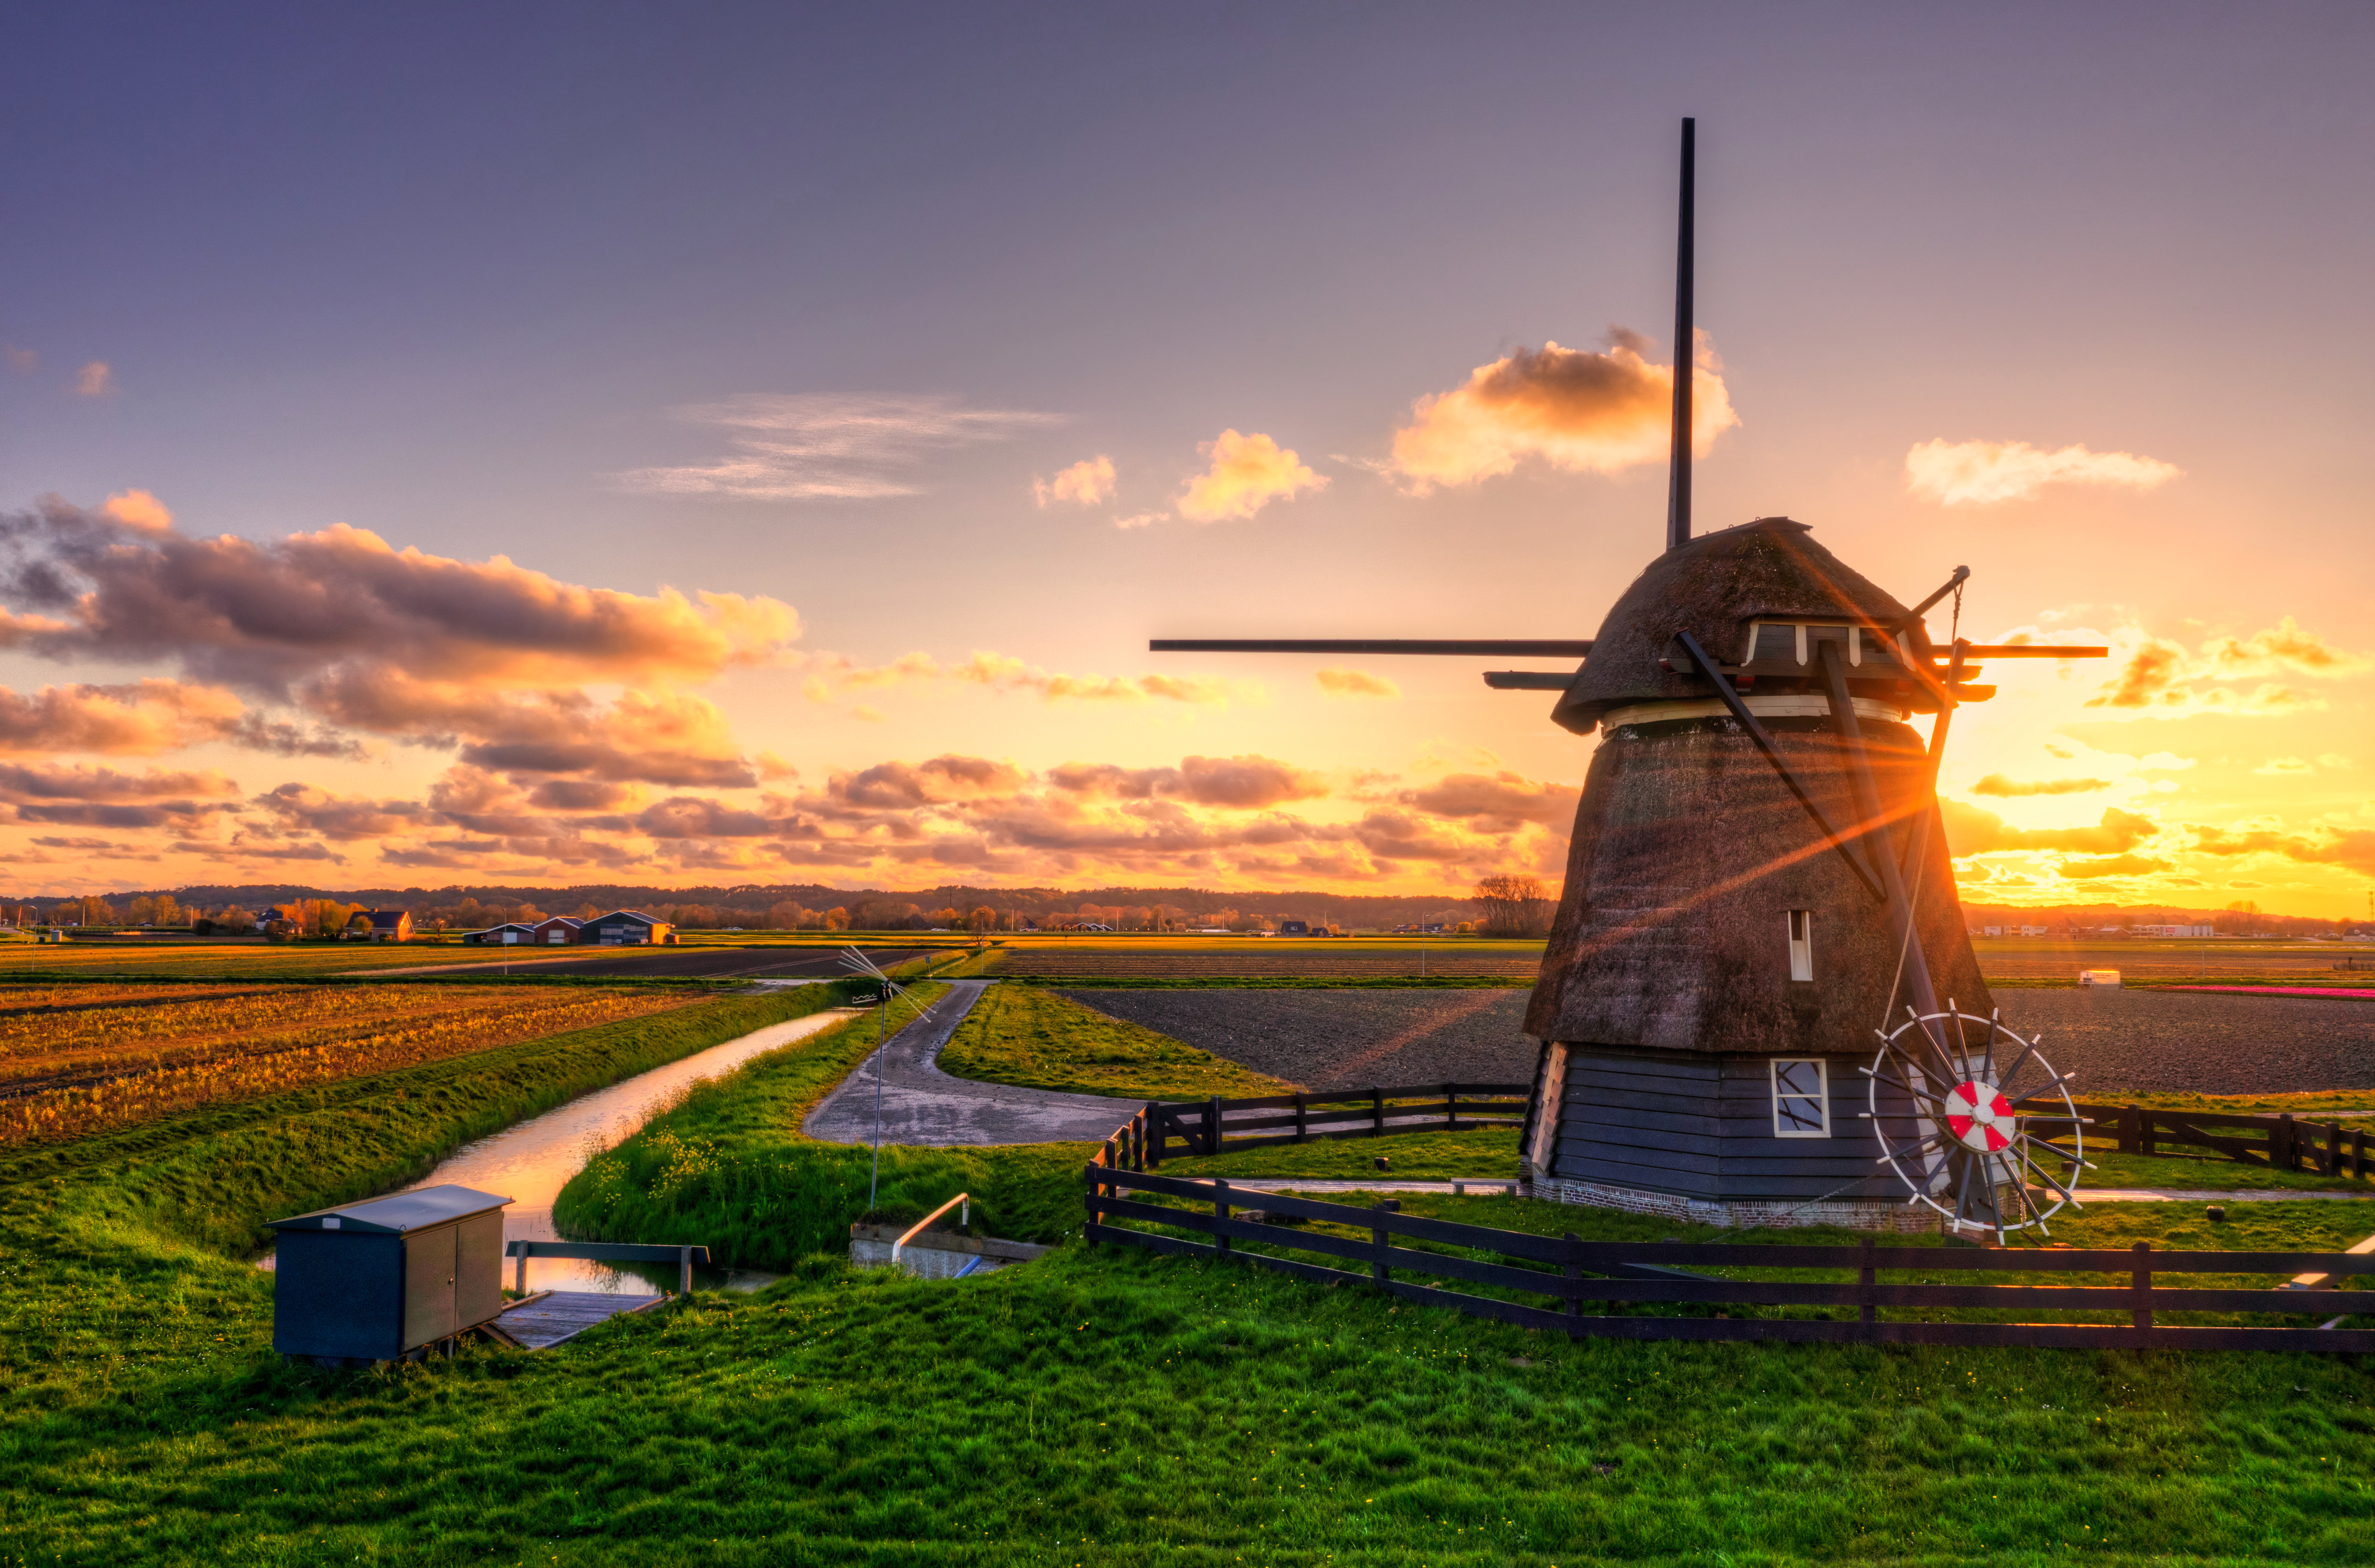 Windmill Field Water Landscape Sun Sunset HDR Clouds Sky Fence Photography Nature Outdoors Warm Warm 5120x3380